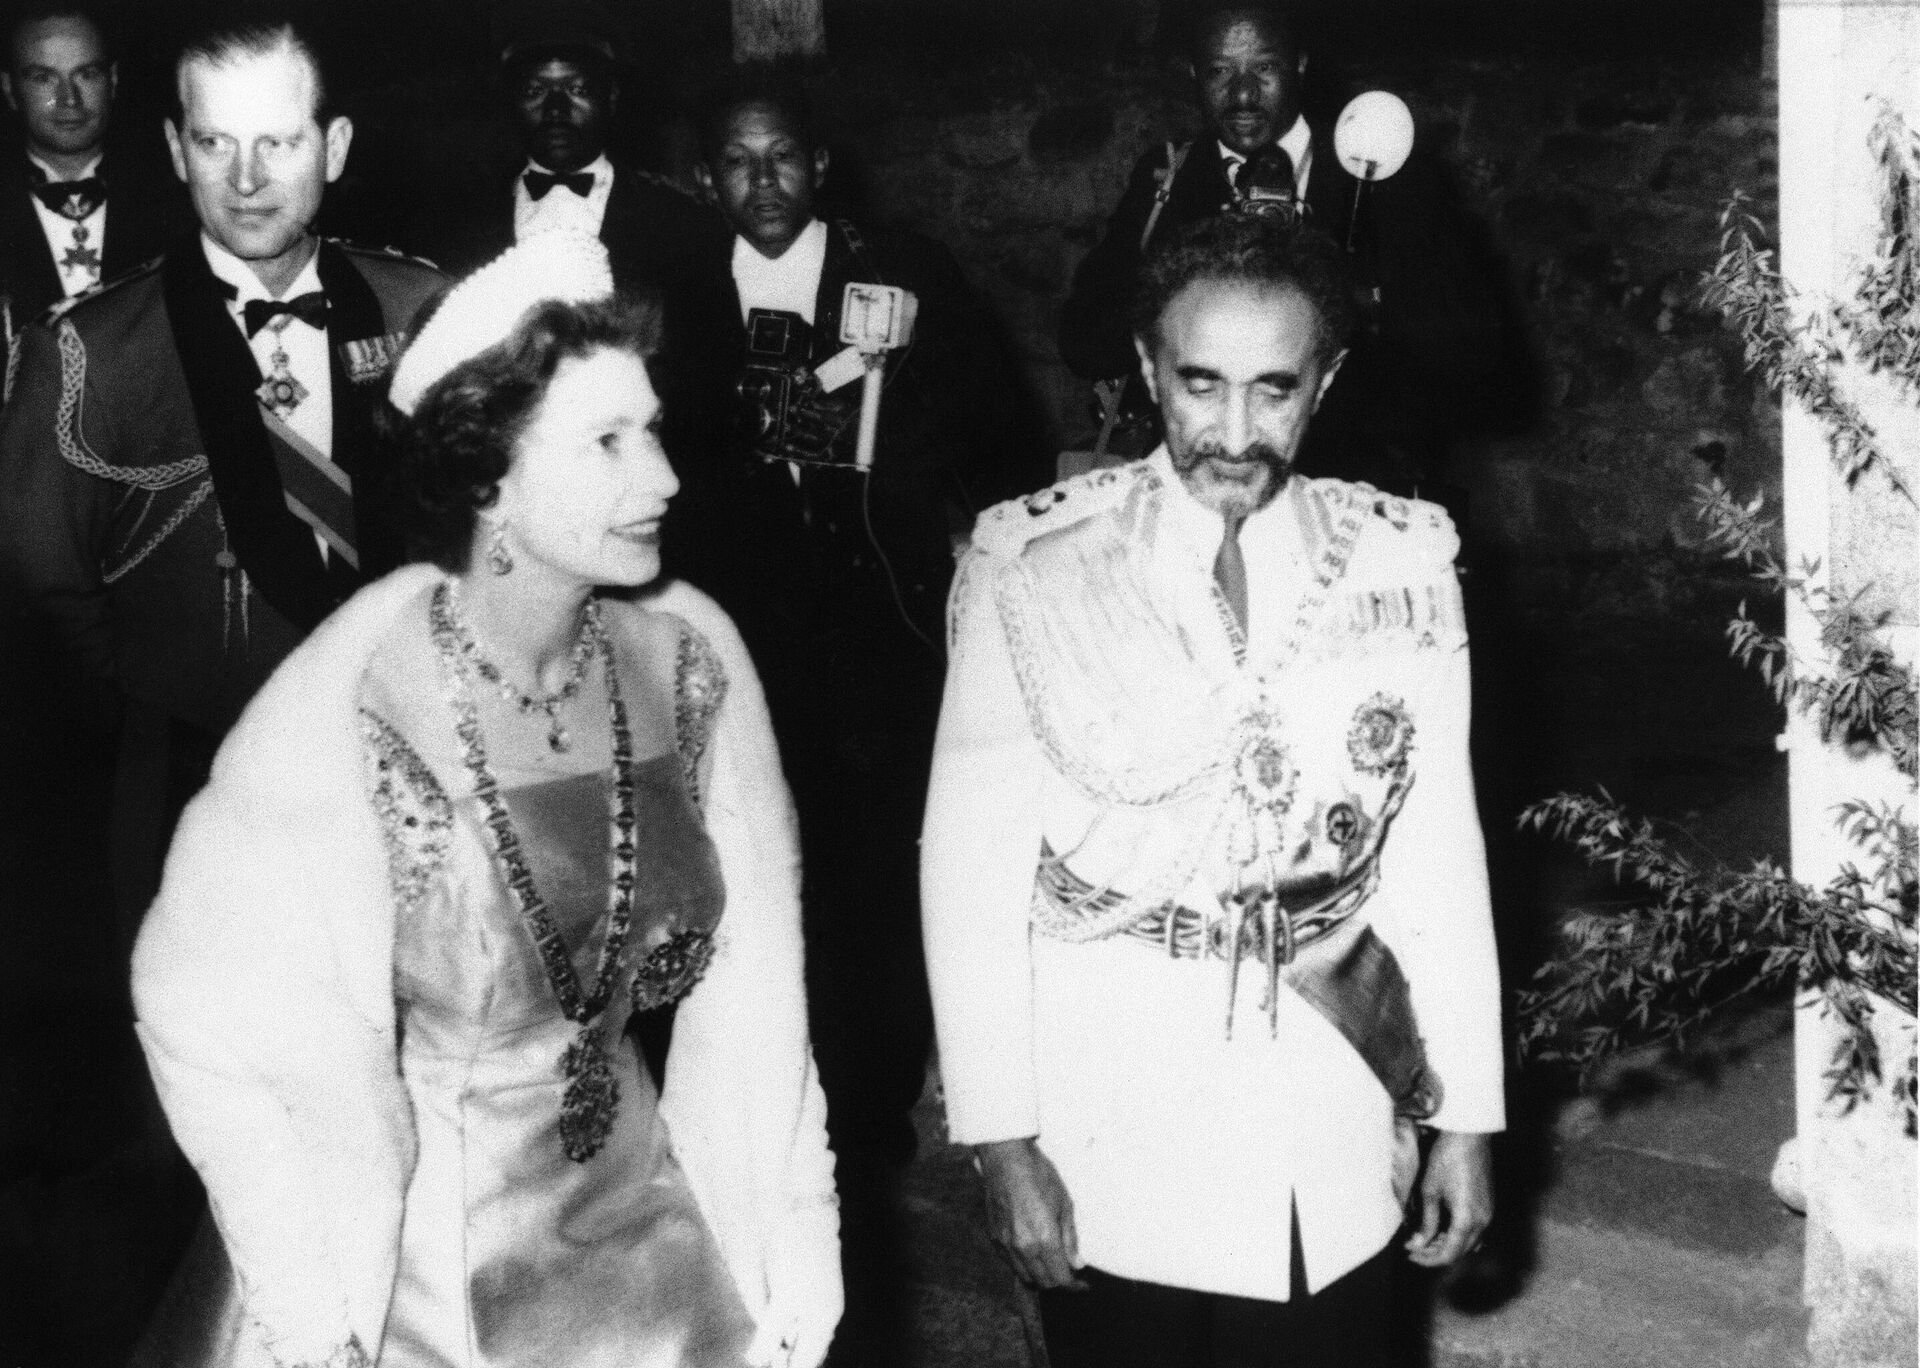 Queen Elizabeth II, the first British monarch to visit Ethiopia, arrives with her host, Emperor Haile Selassie, for a State Banquet on the first day of her eight-day visit in Addis Ababa Feb. 1, 1965. Following is the Duke of Edinburgh. - Sputnik International, 1920, 10.09.2022